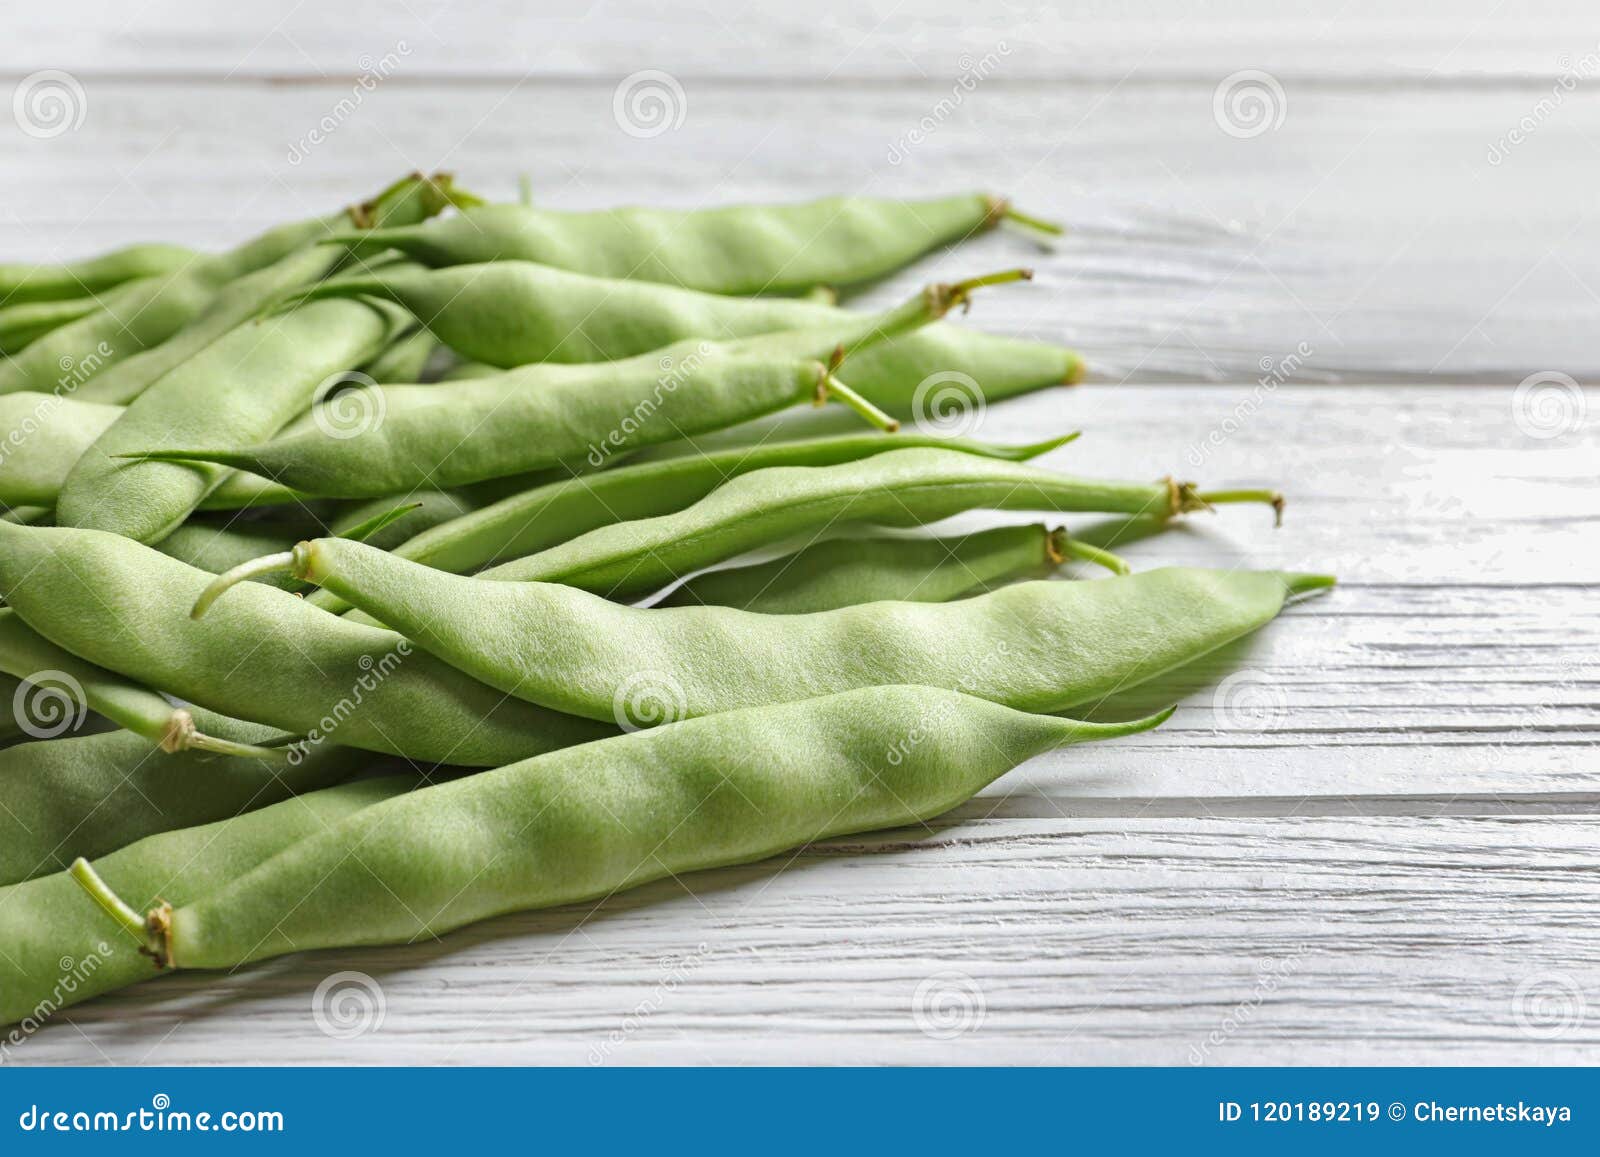 Fresh green beans on table stock image. Image of background - 120189219